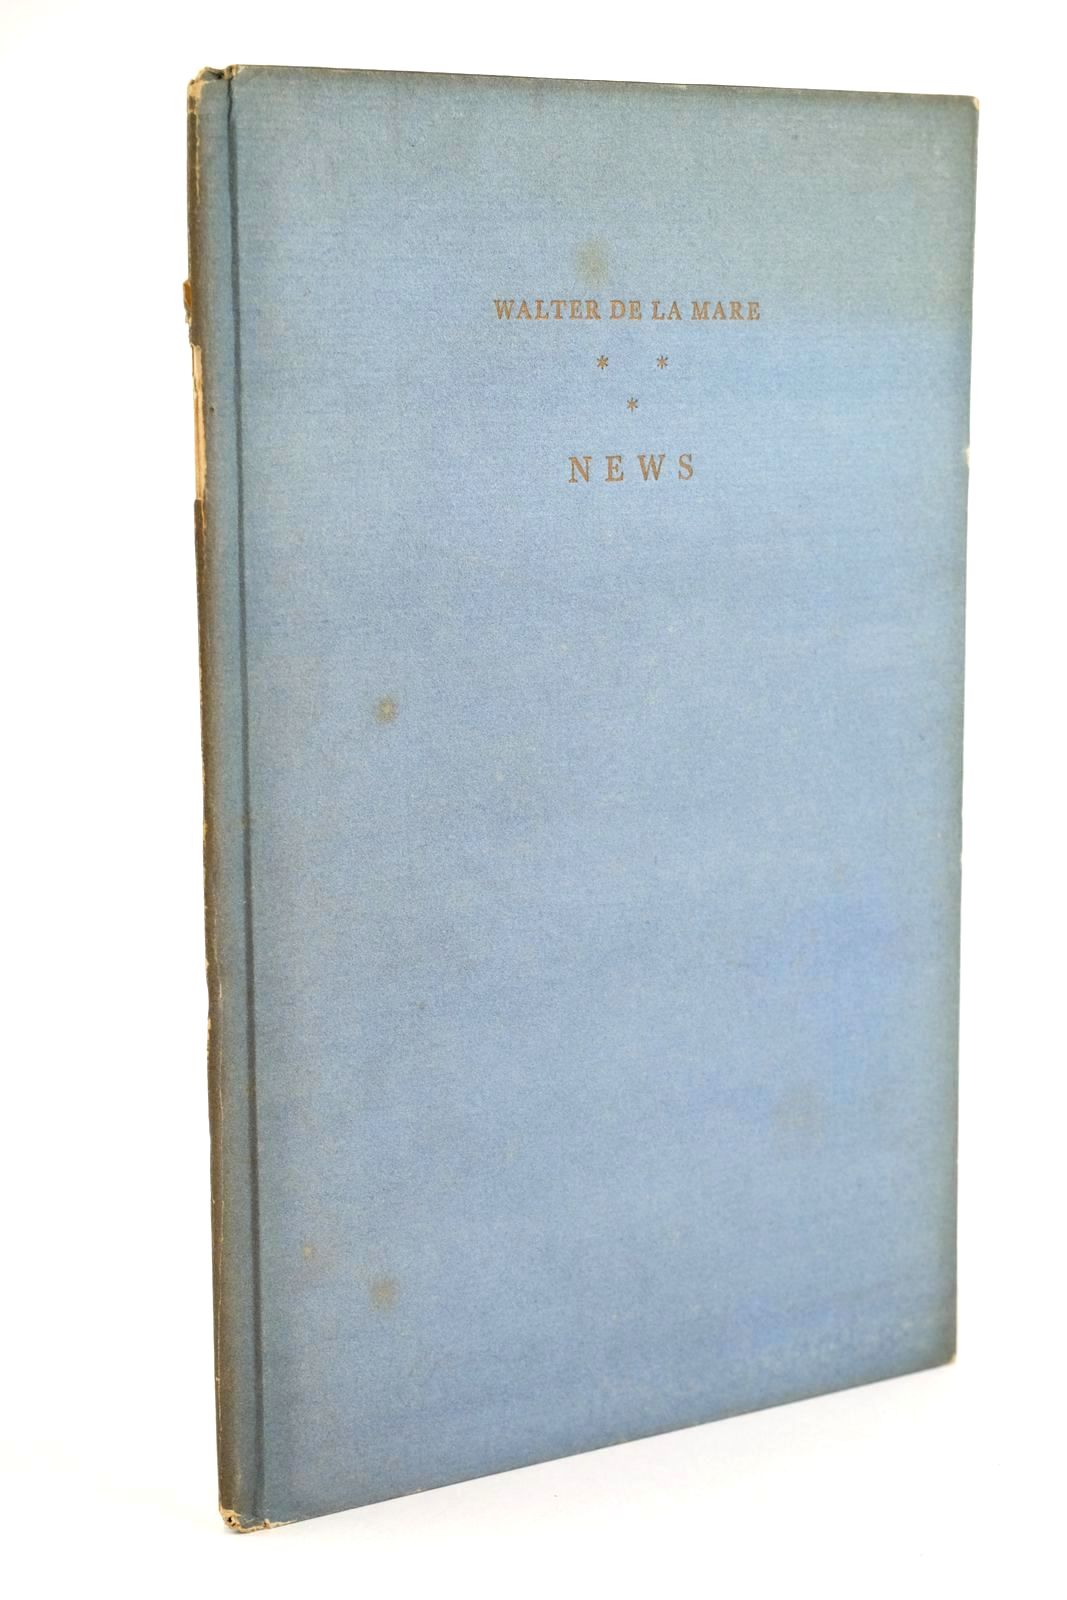 Photo of NEWS written by De La Mare, Walter illustrated by Freedman, Barnett published by Faber &amp; Faber Limited (STOCK CODE: 1323712)  for sale by Stella & Rose's Books